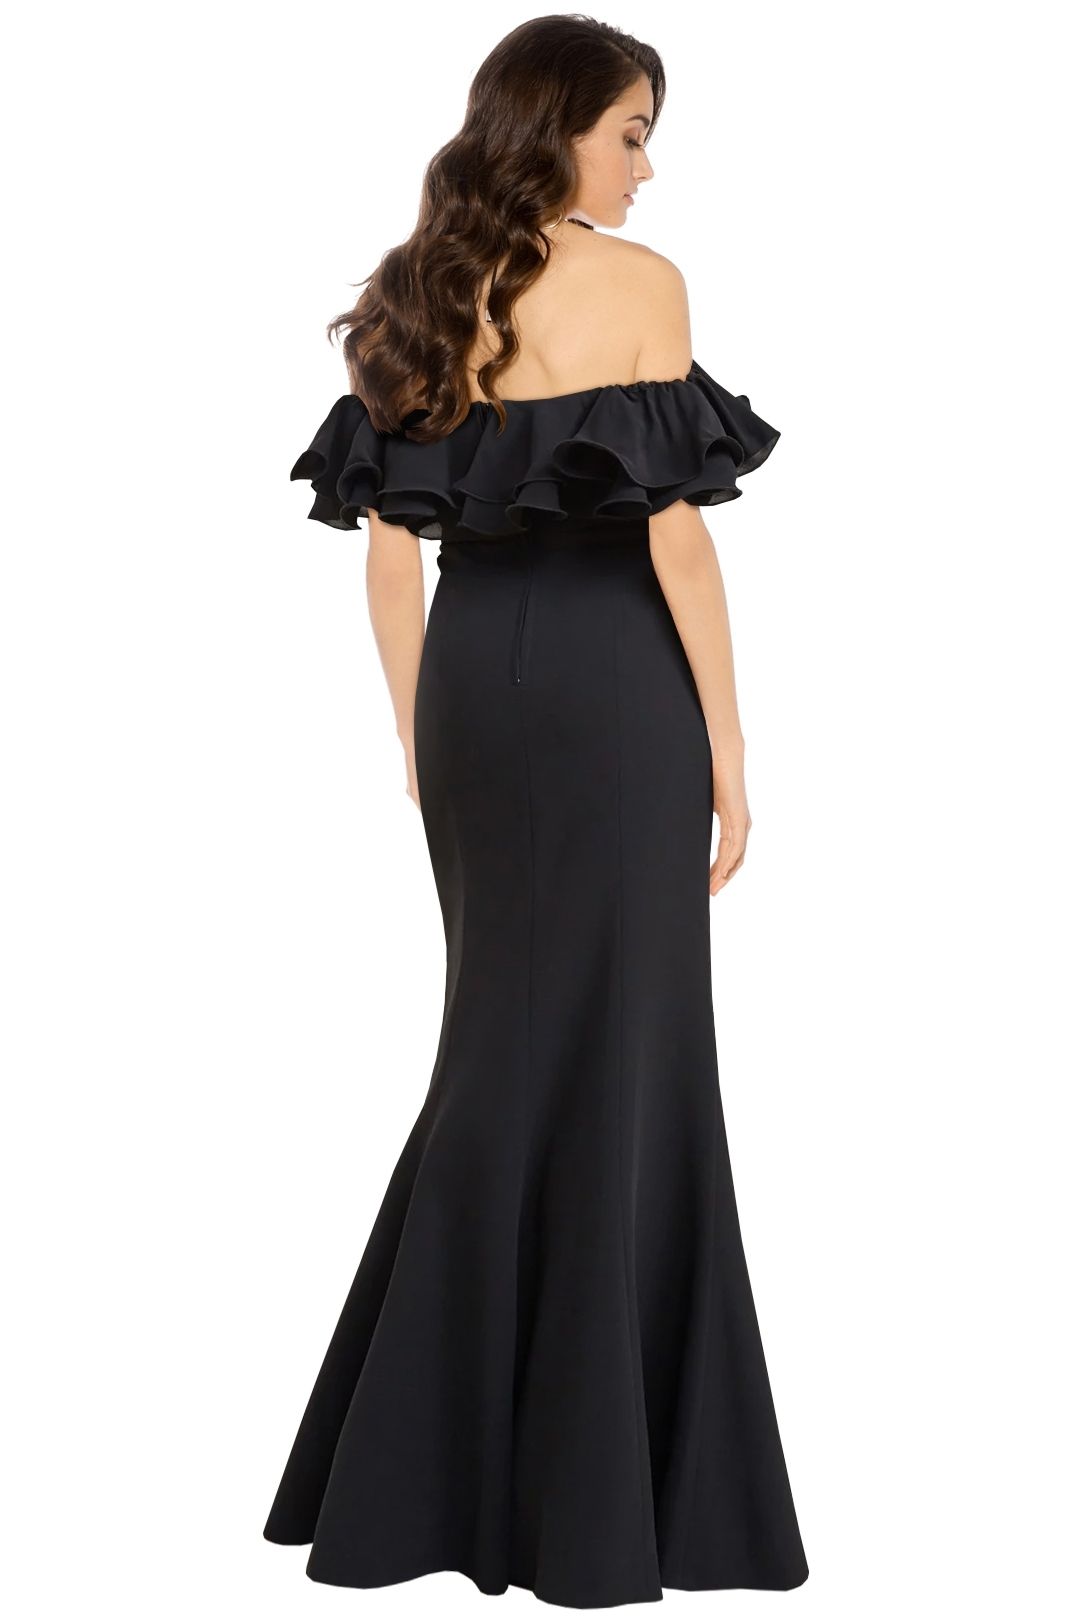 Cameo - Immerse Gown - Black - Back